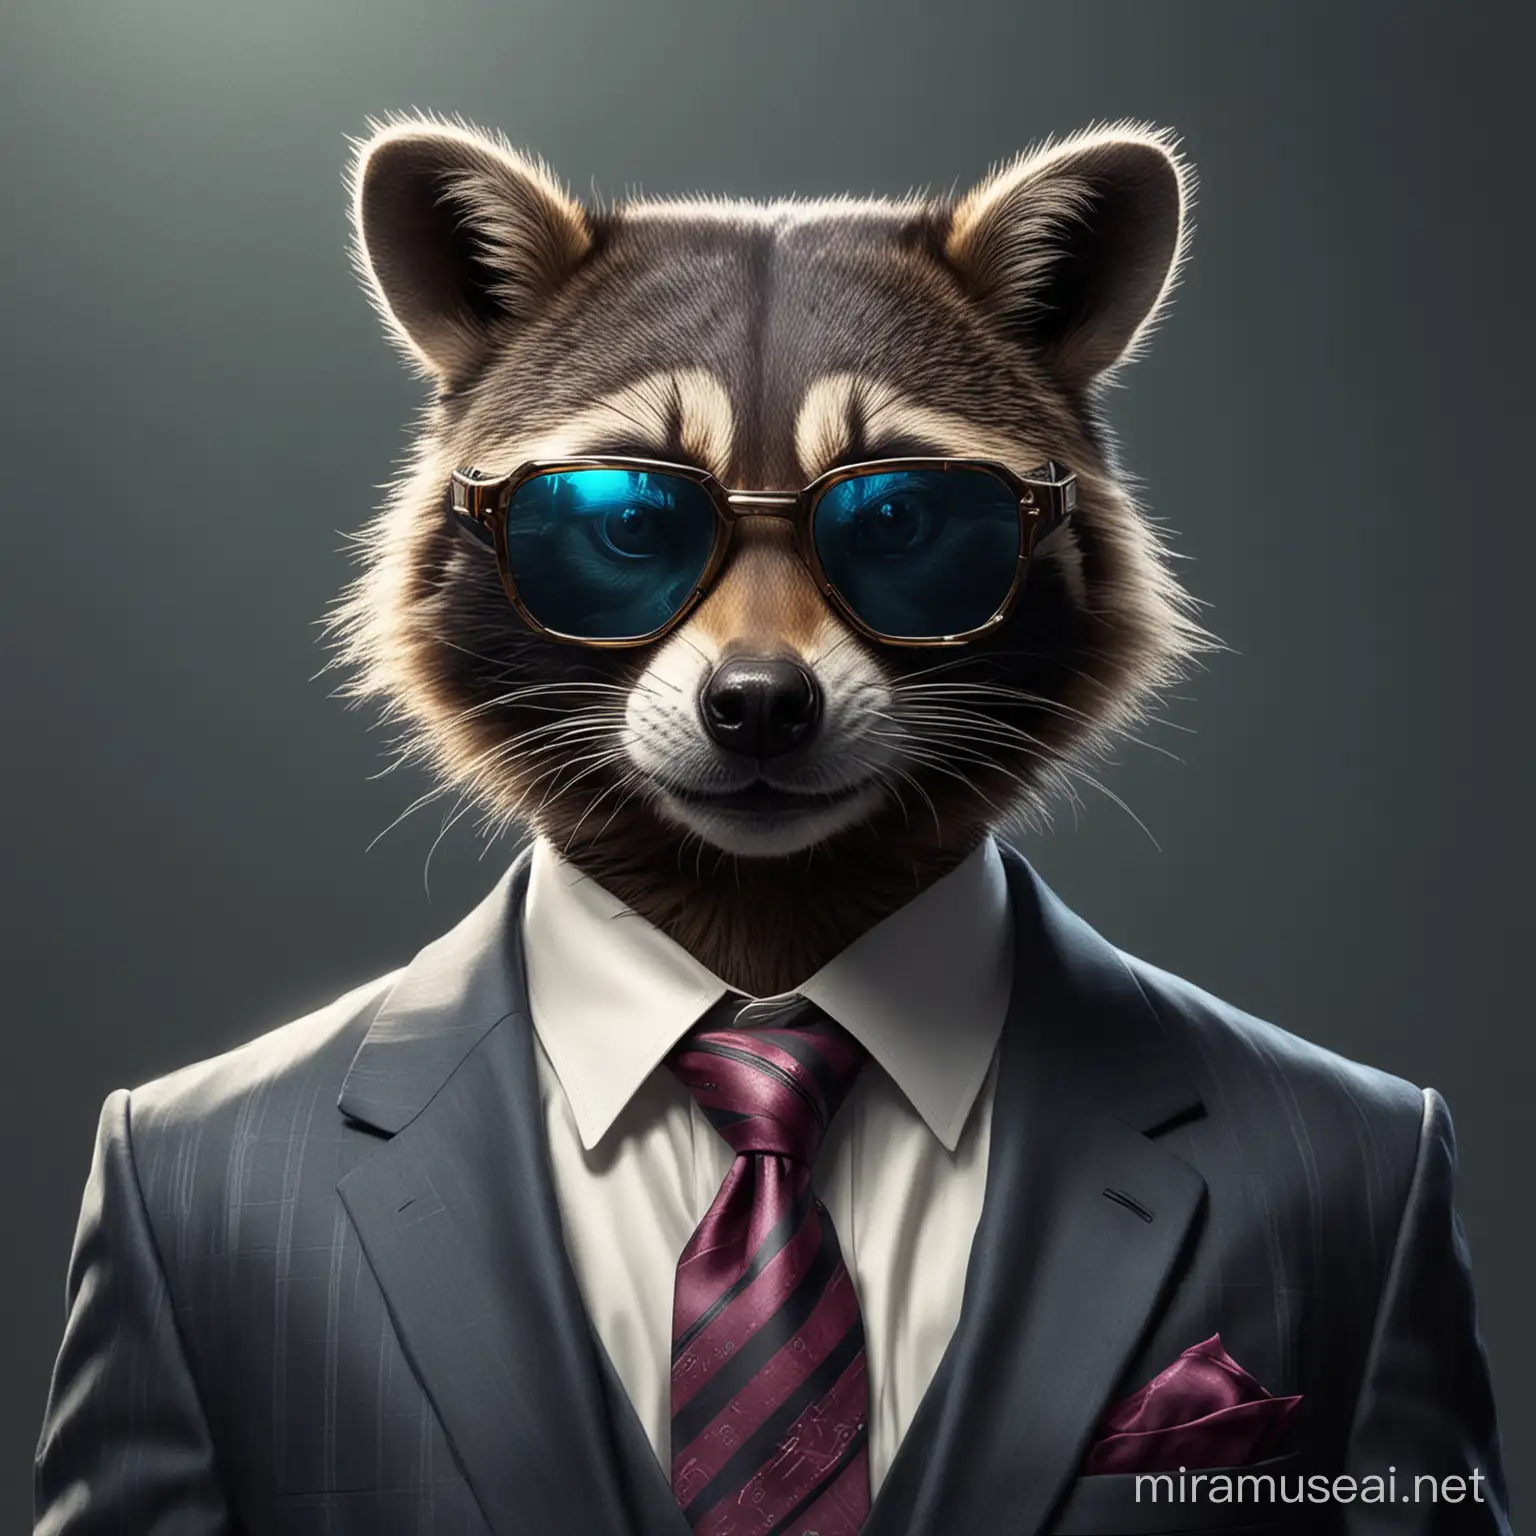 Cyberpunk Raccoon in Business Suit and Sunglasses Art